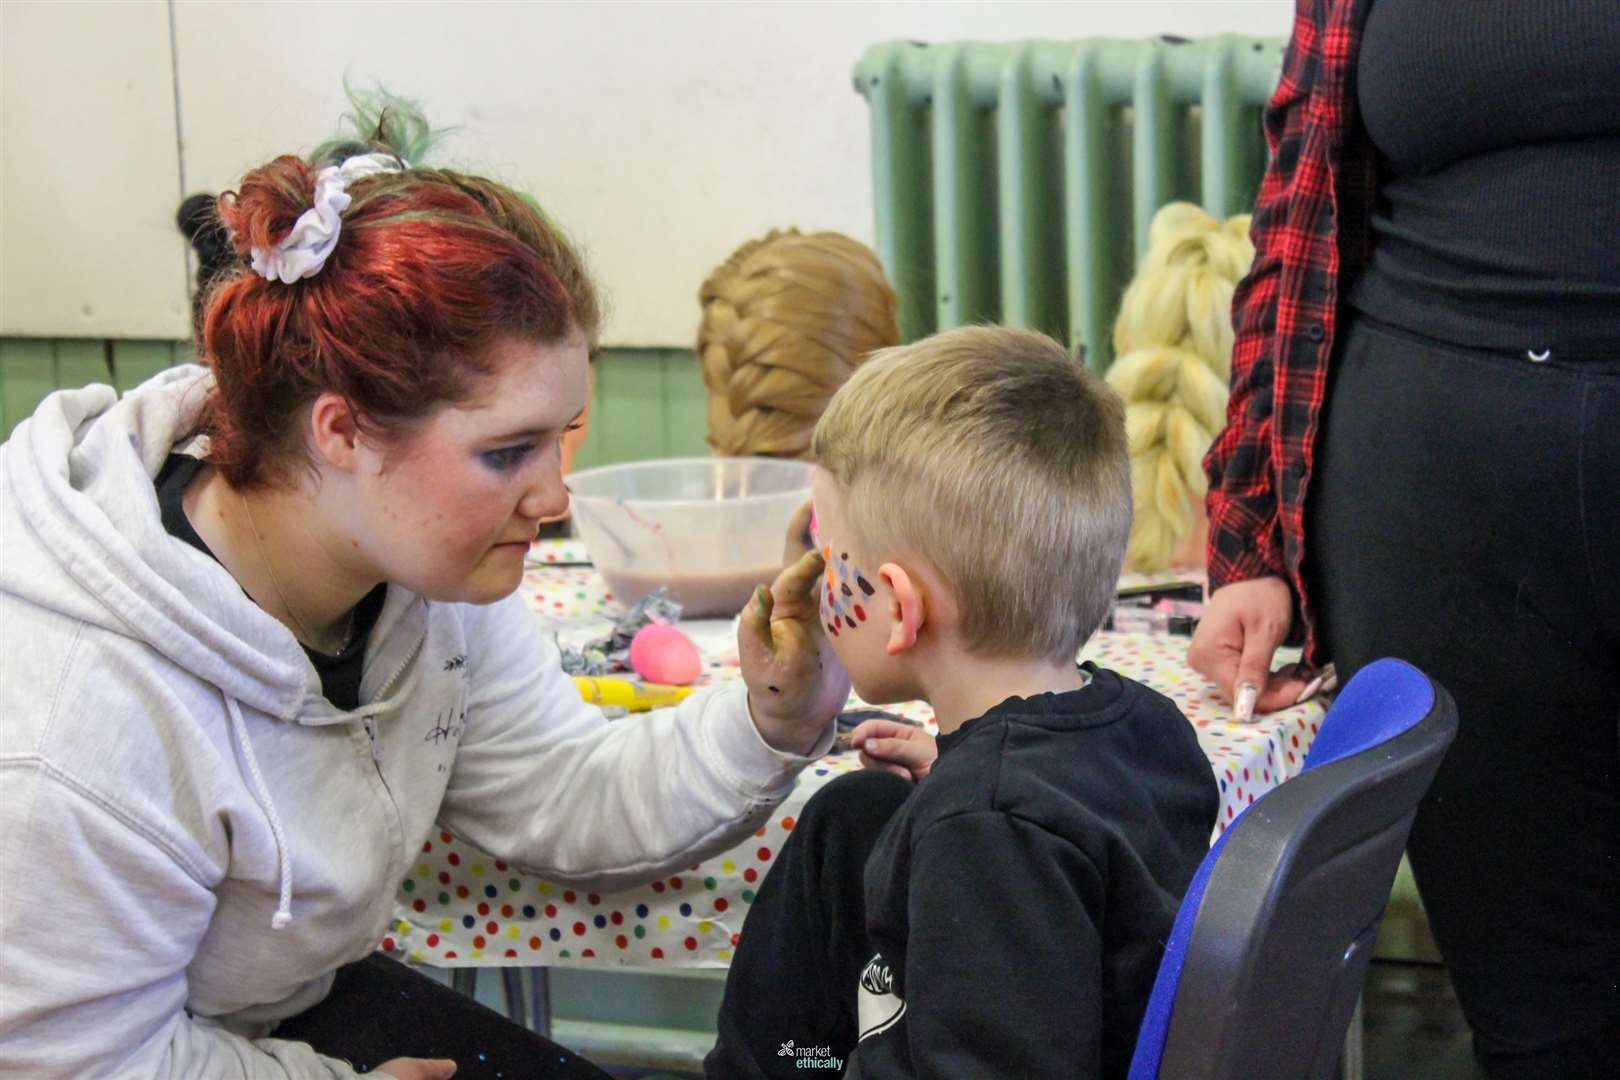 Face painting fun at the fundraiser. Image courtesy of Market Ethically